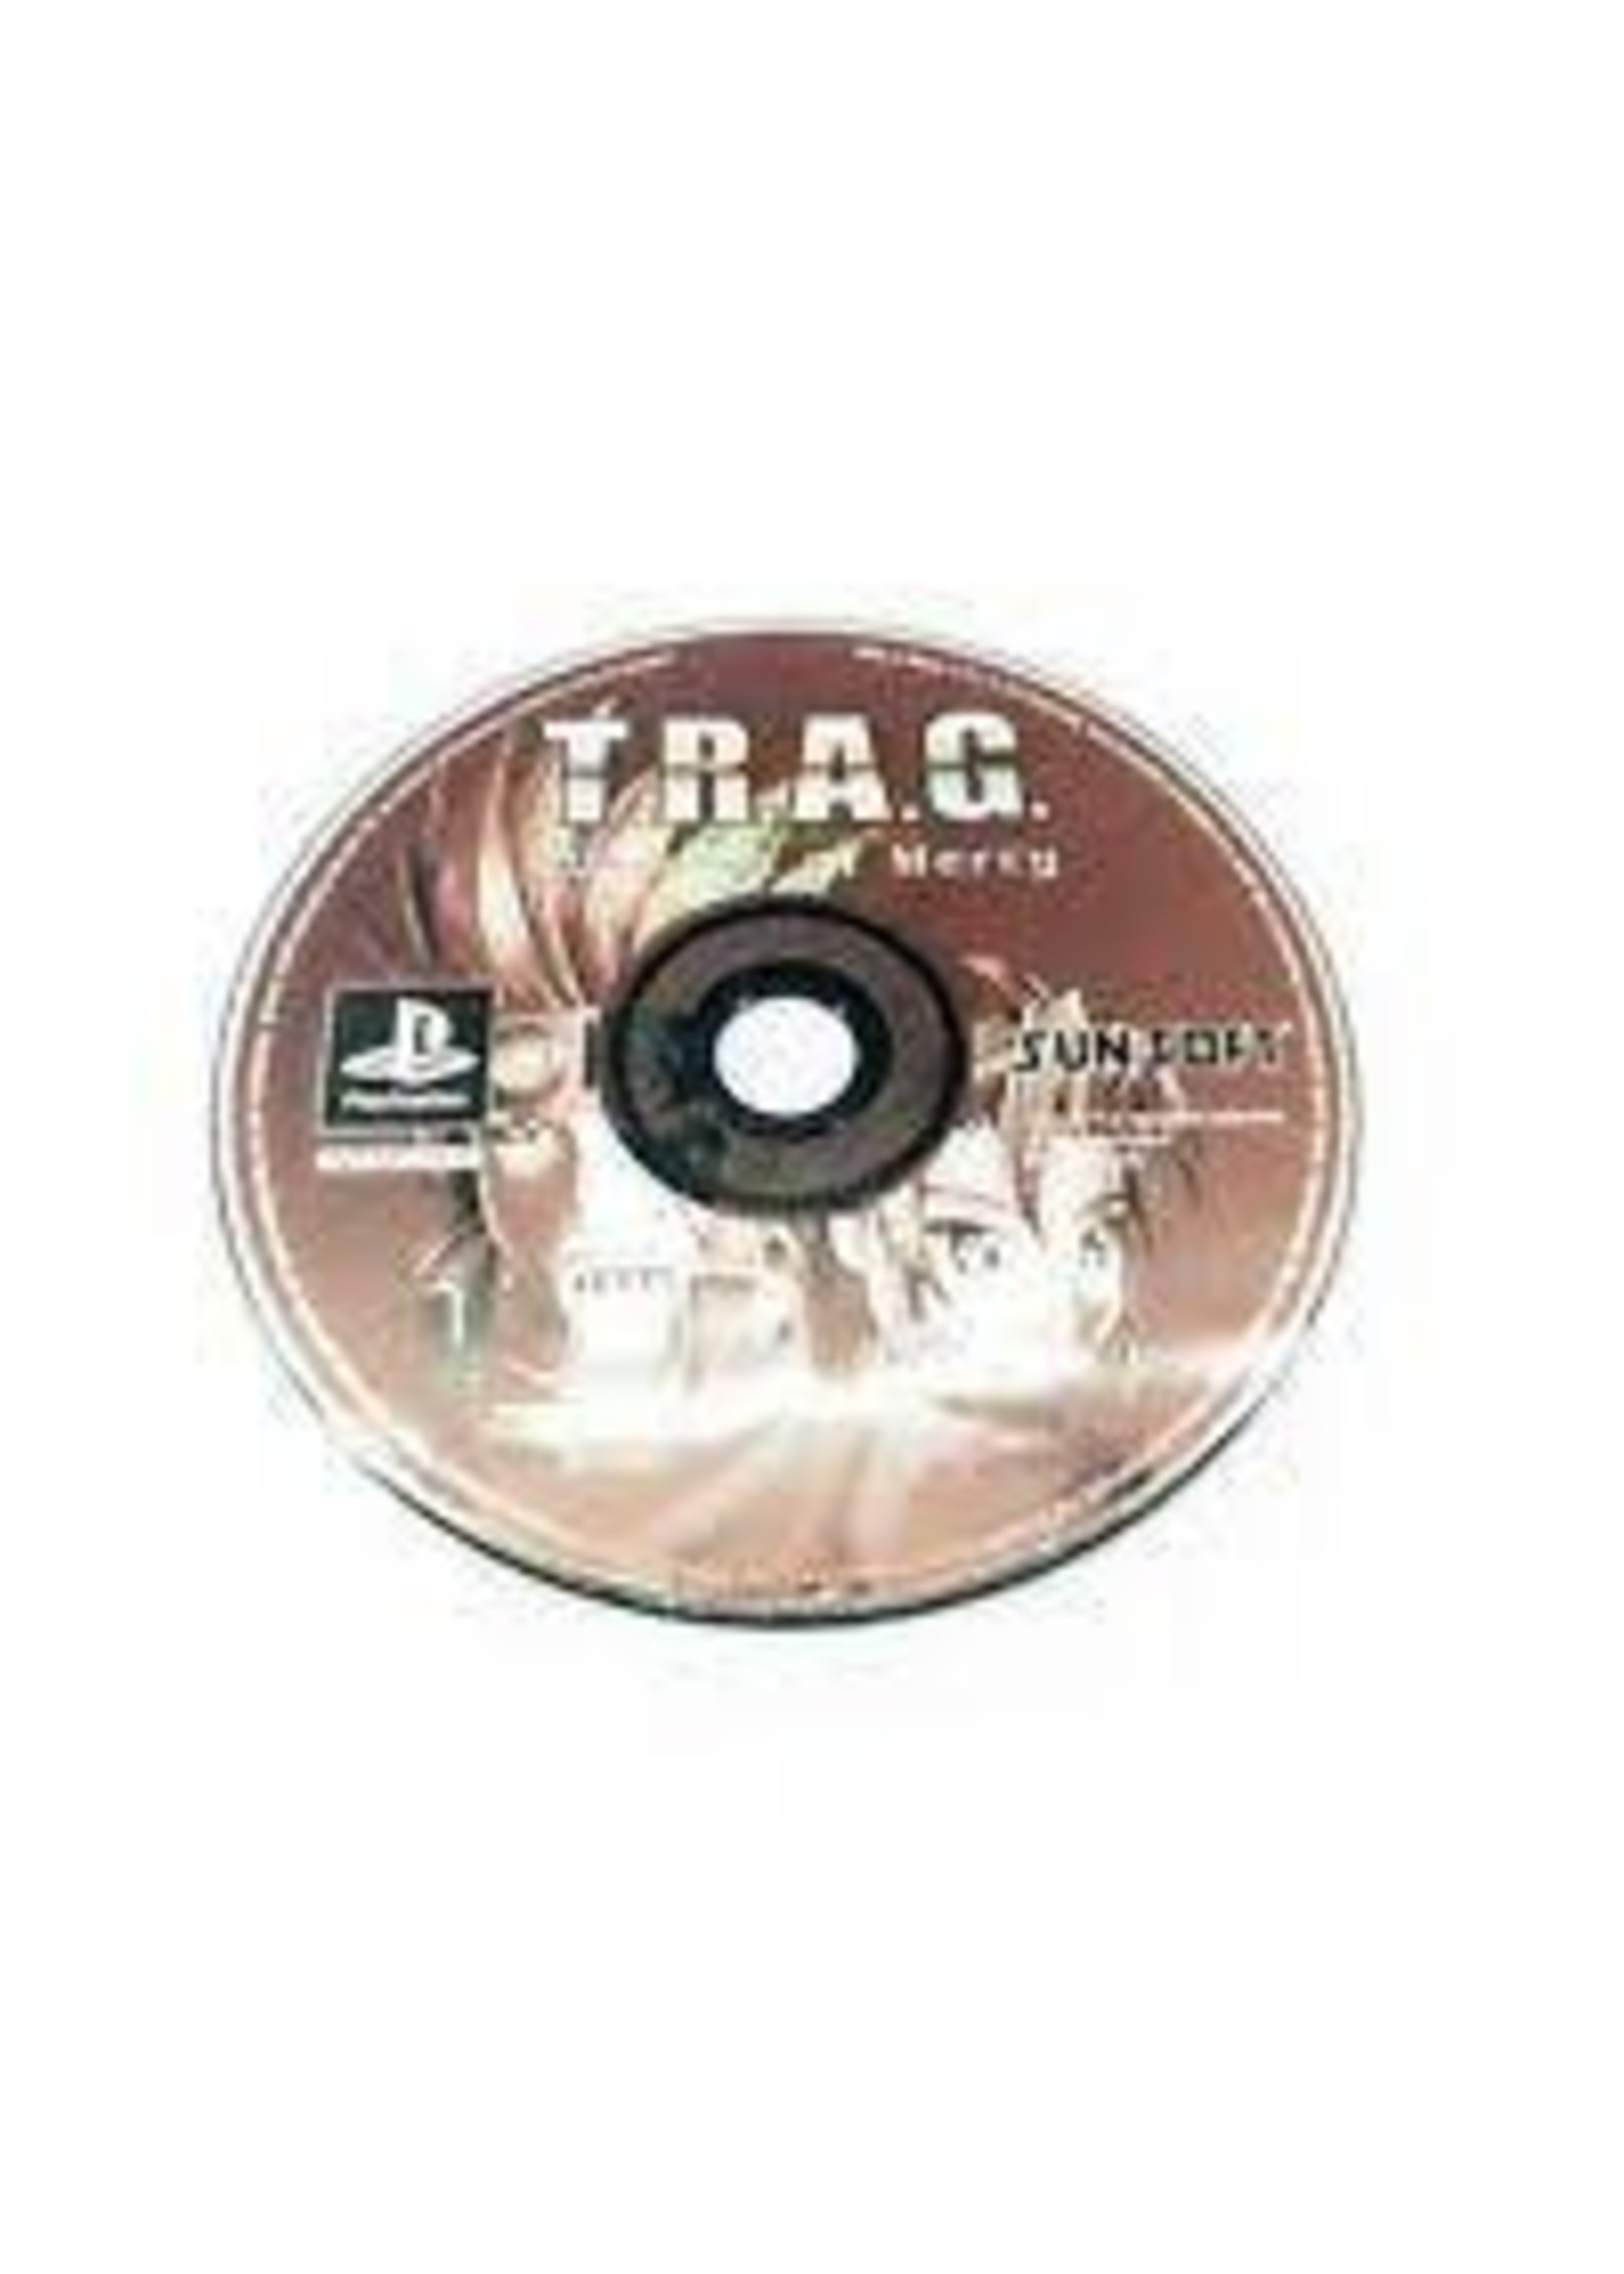 Sony Playstation 1 (PS1) TRAG Mission of Mercy - Print